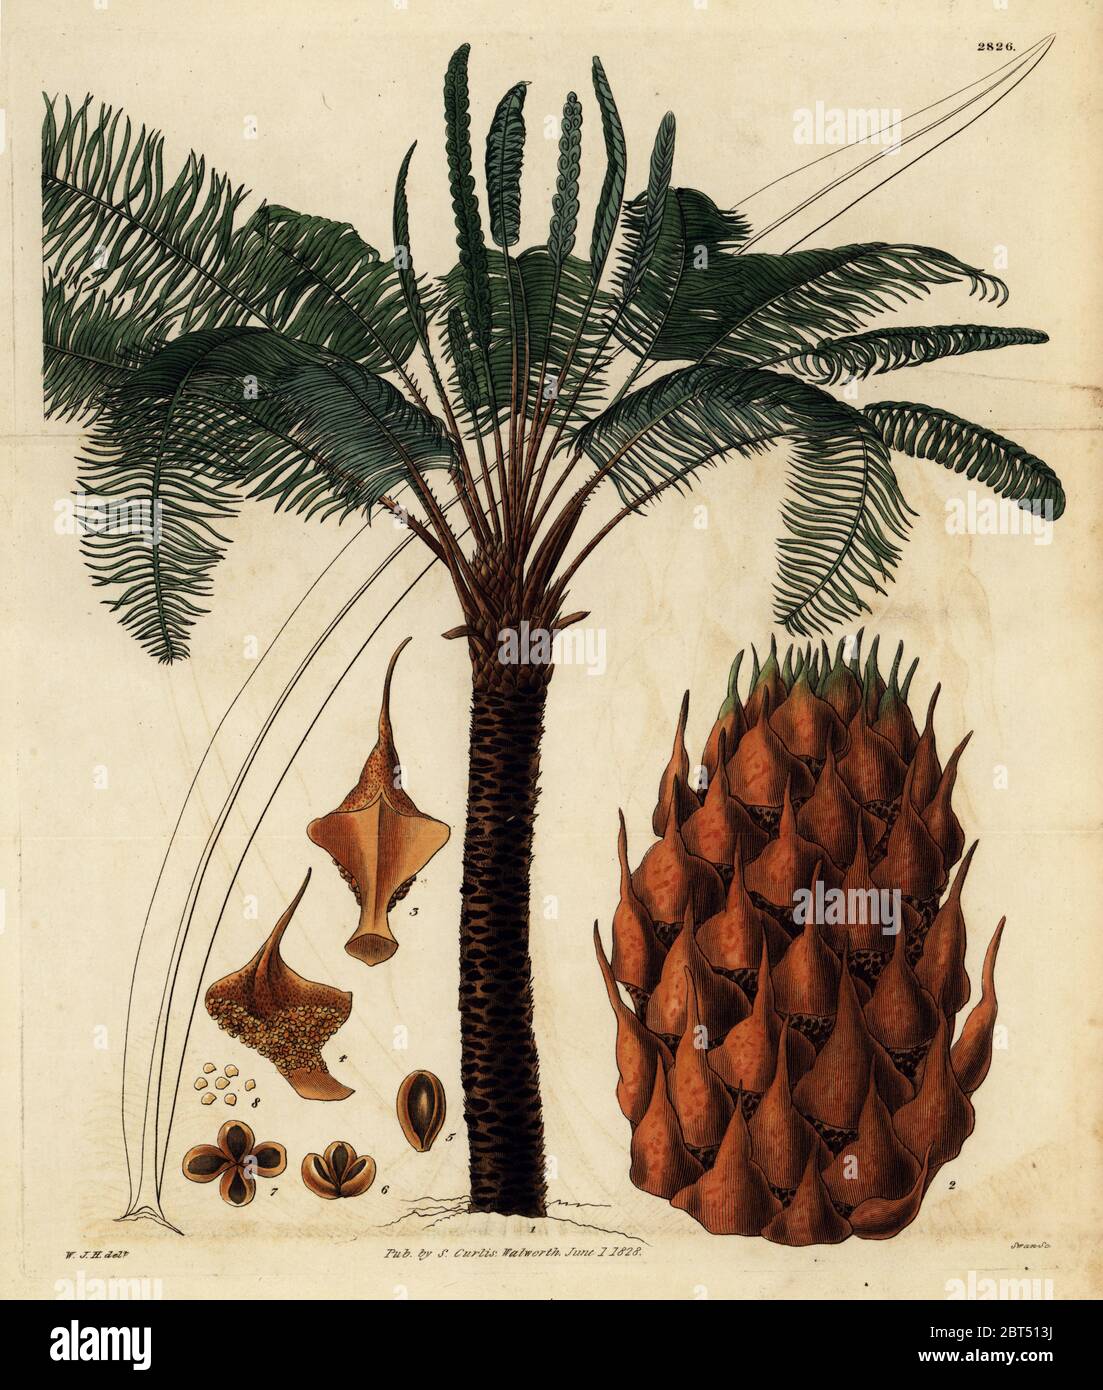 Queen sago or broad-leaved cycas, Cycas circinalis. Endangered. Handcoloured copperplate engraving by Swan after an illustration by William Jackson Hooker from Samuel Curtis' Botanical Magazine, London, 1828. Stock Photo